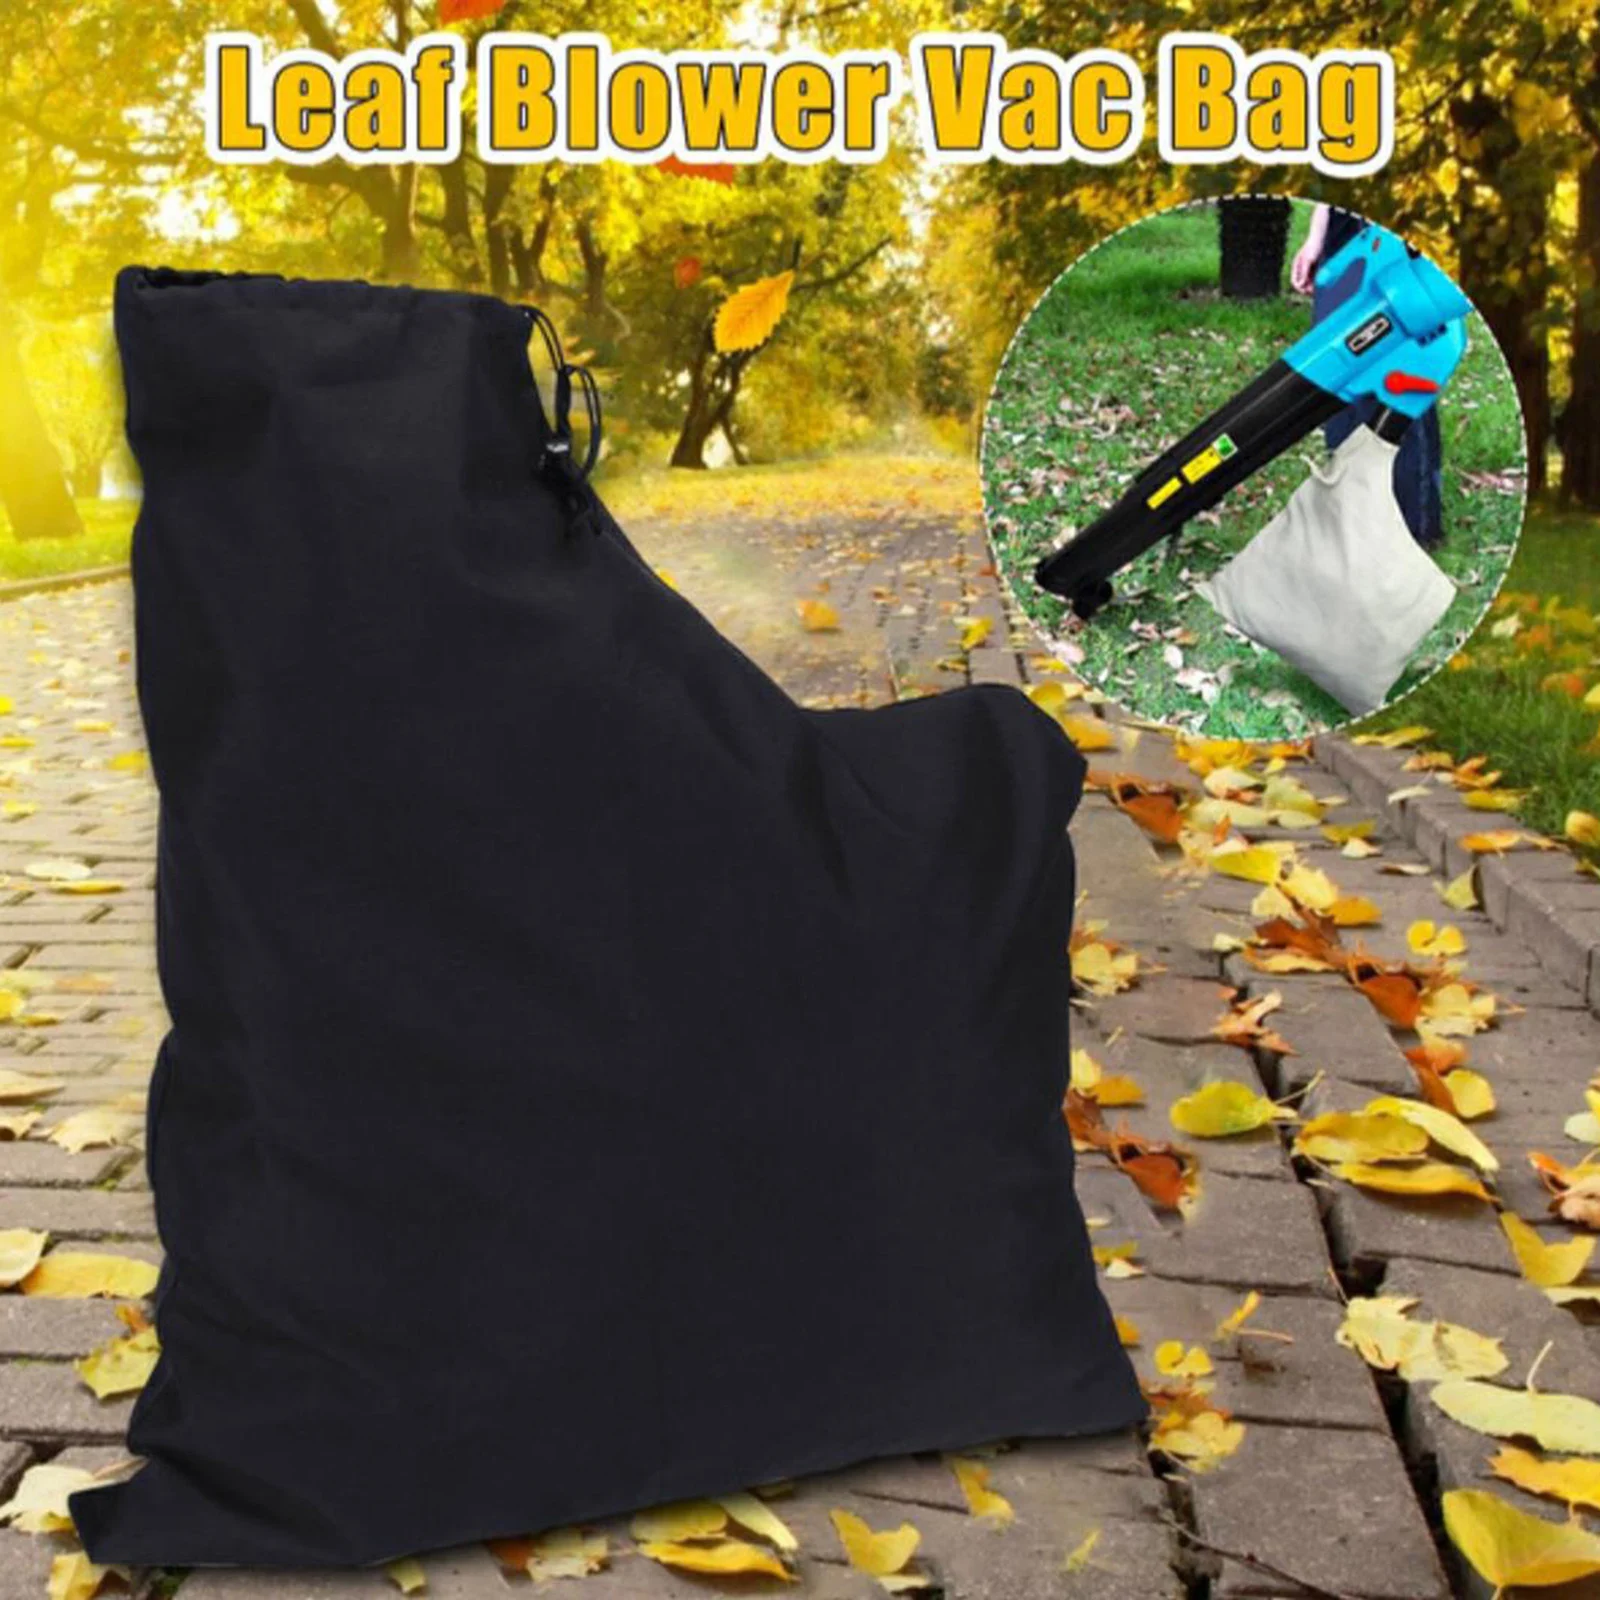 Electric Leaf Blower Cleaner Vacuum Replacement Bag Zippered Collection Pro Blower Parts Yard Vacuums Chipper Shredder